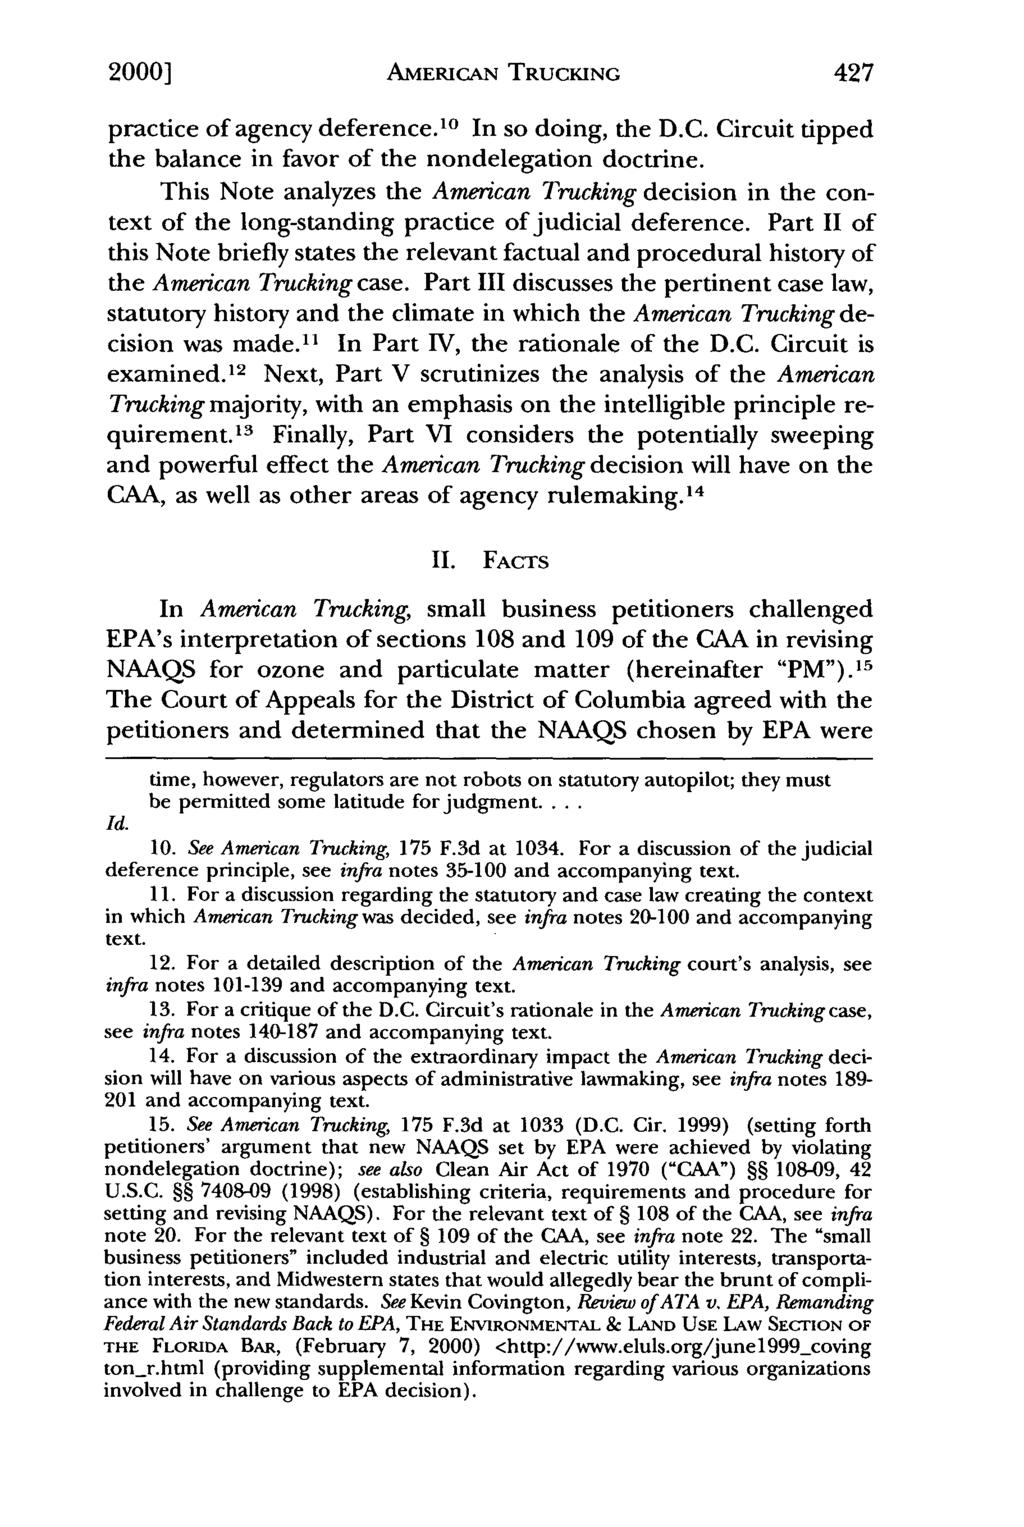 2000] Quandt: American Trucking Associations, Inc. v. United States Environment AMERICAN TRUCKING practice of agency deference. 10 In so doing, the D.C. Circuit tipped the balance in favor of the nondelegation doctrine.